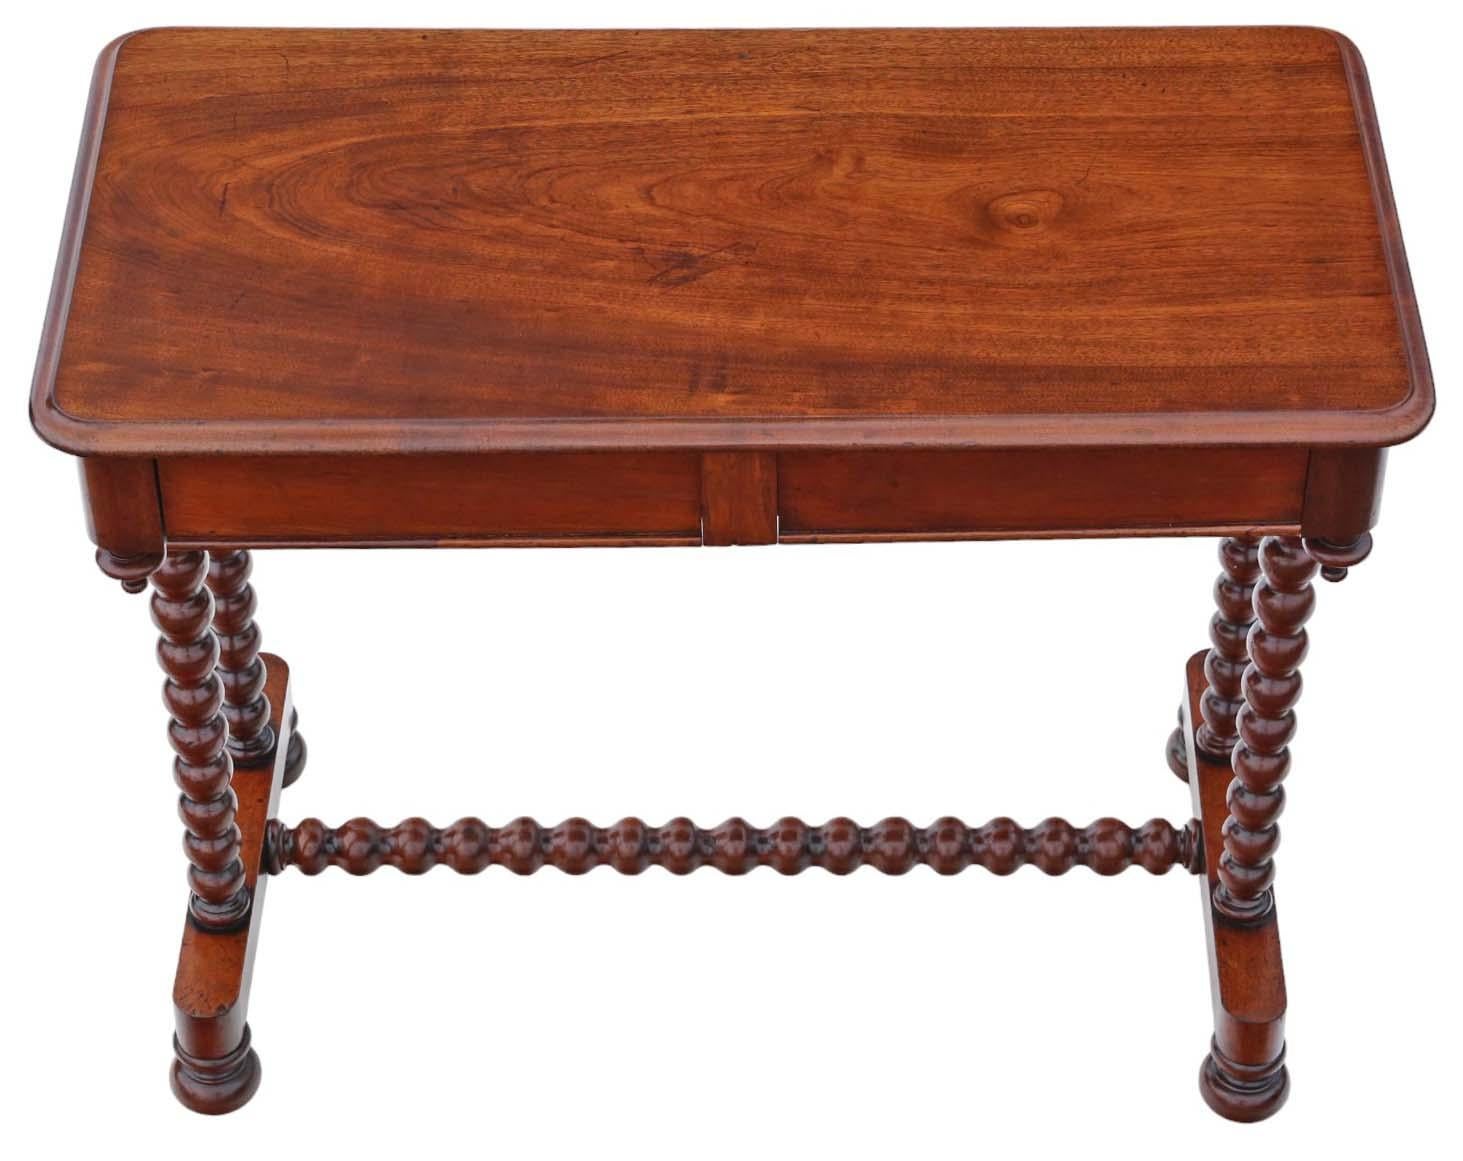 Introducing an Antique Fine Quality 19th Century Bobbin Turned Mahogany Writing Table, versatile as a desk, dressing, lamp, or large bedside table, showcasing a decorative design with two blind drawers.

Recently restored, the finishes of this